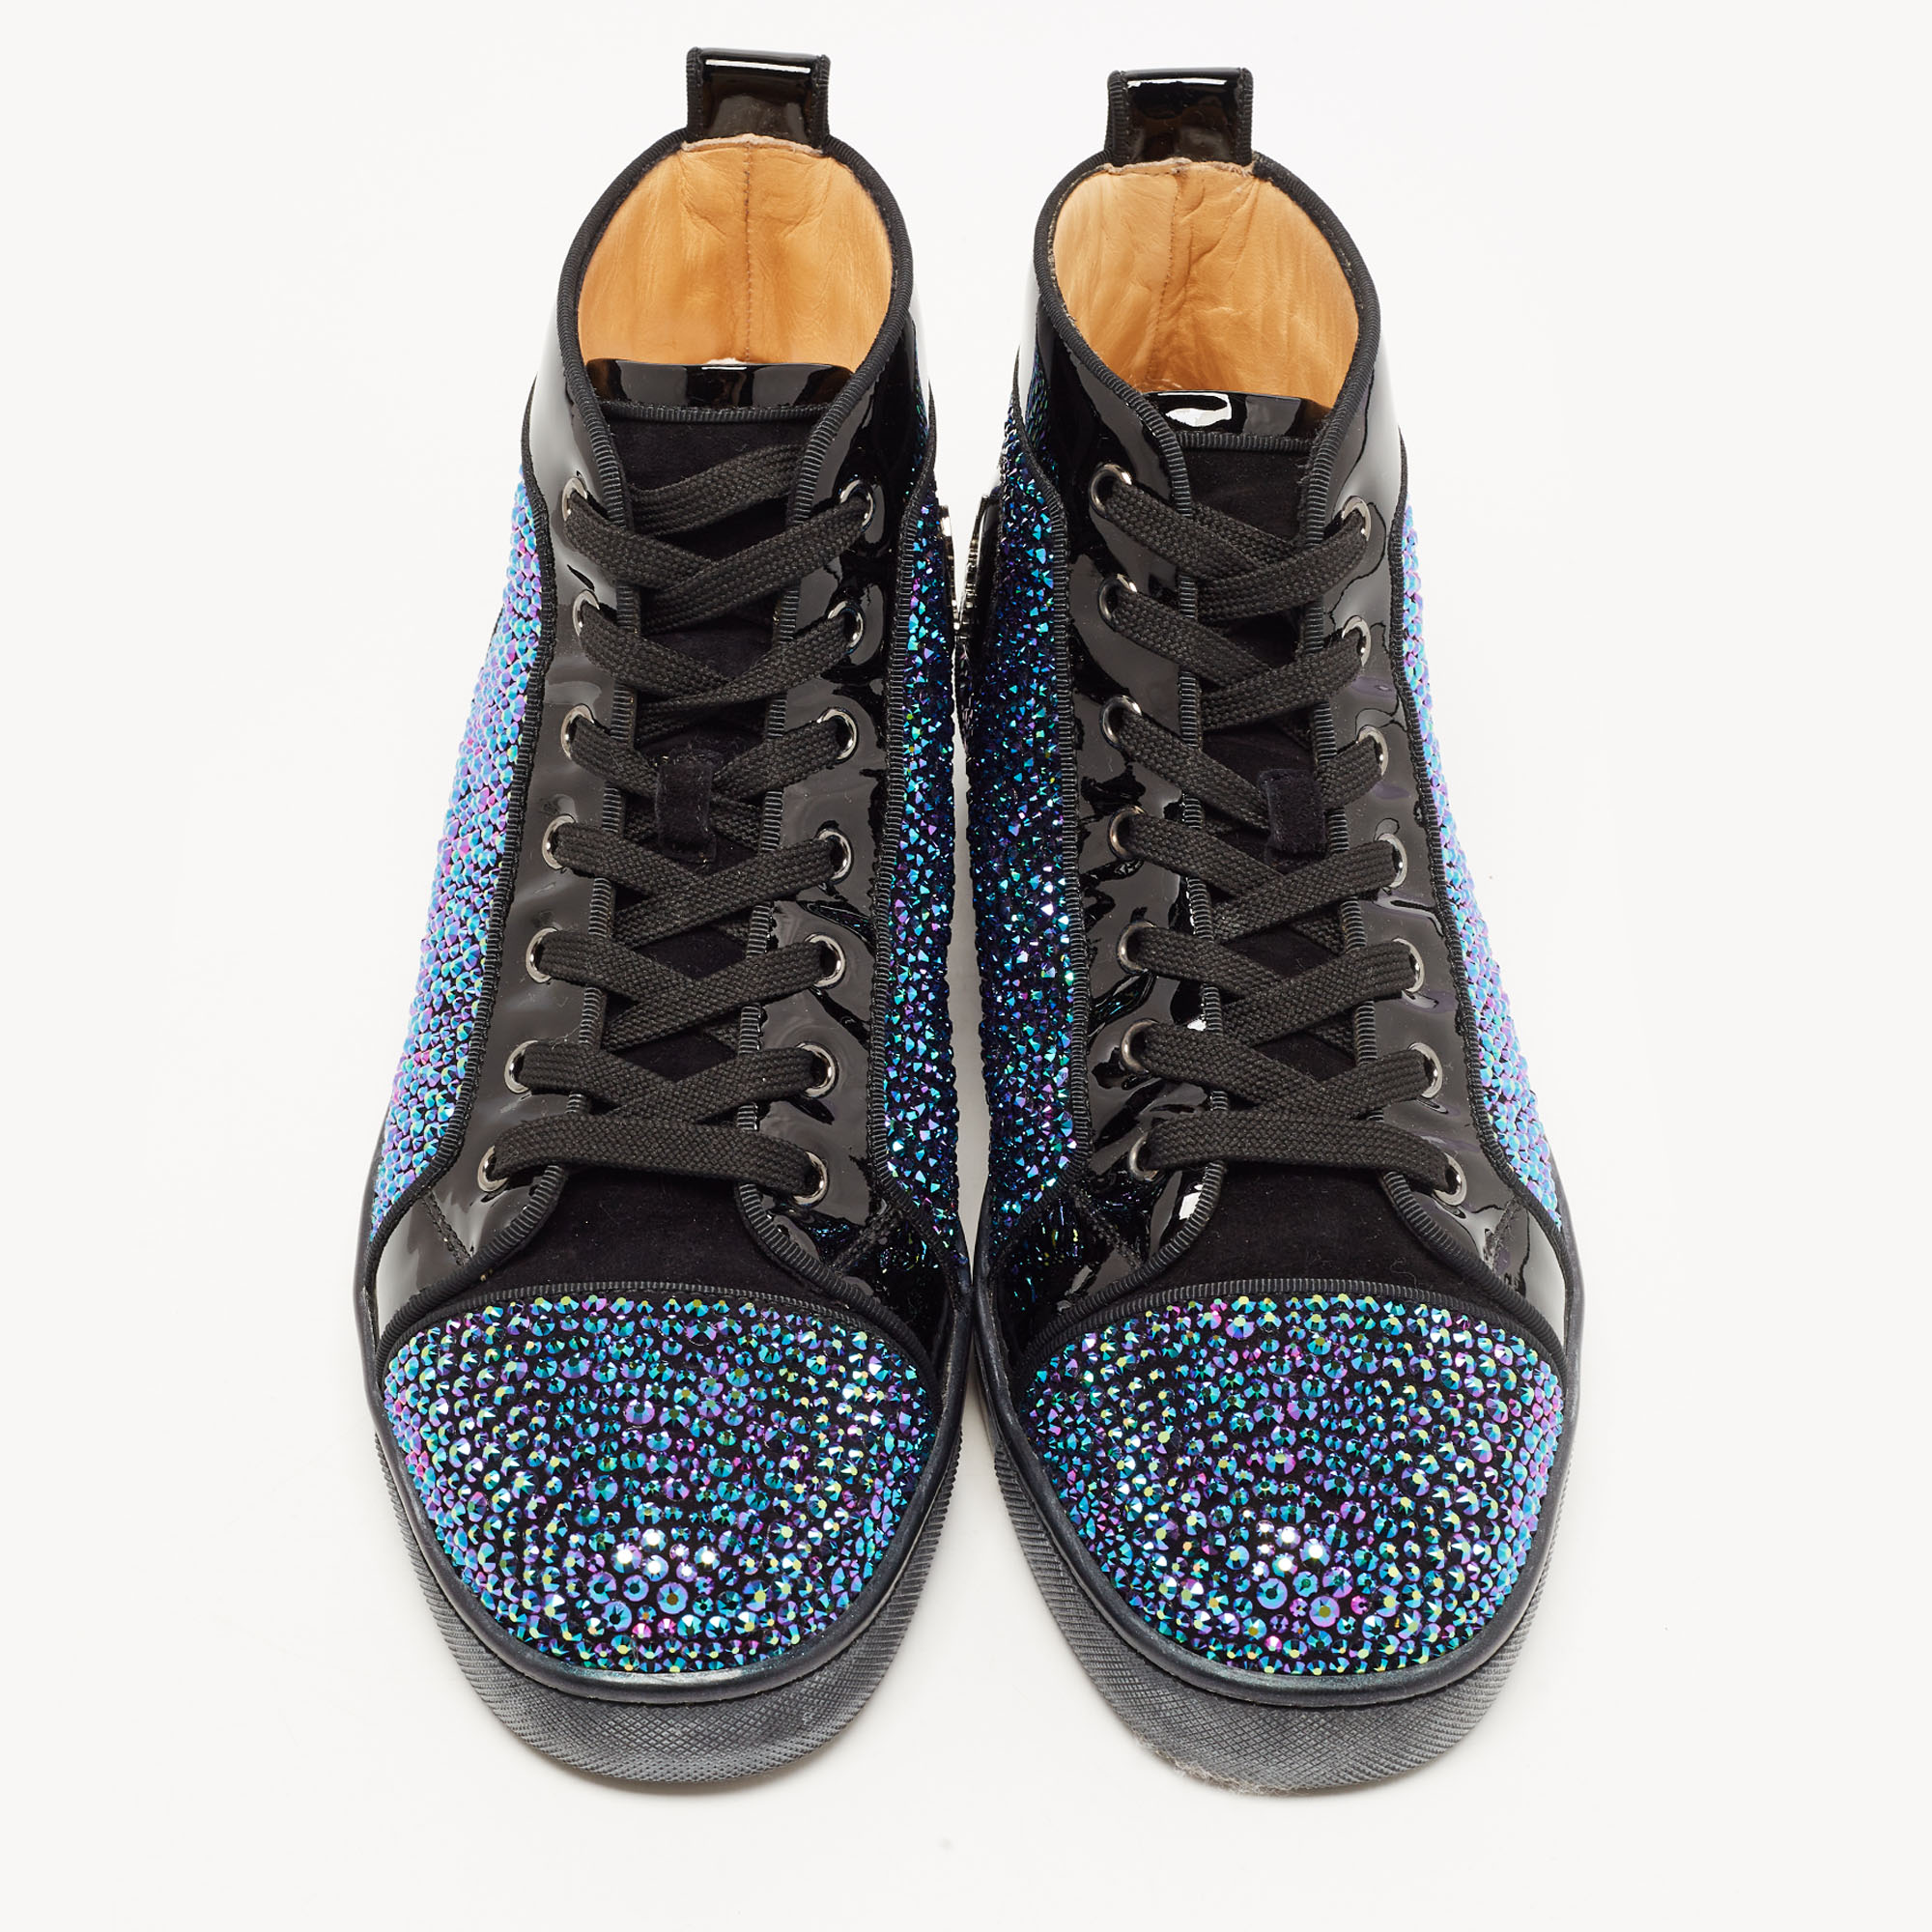 Christian Louboutin Black Patent Leather And Suede Embellished Louis High-Top Sneakers Size 40.5